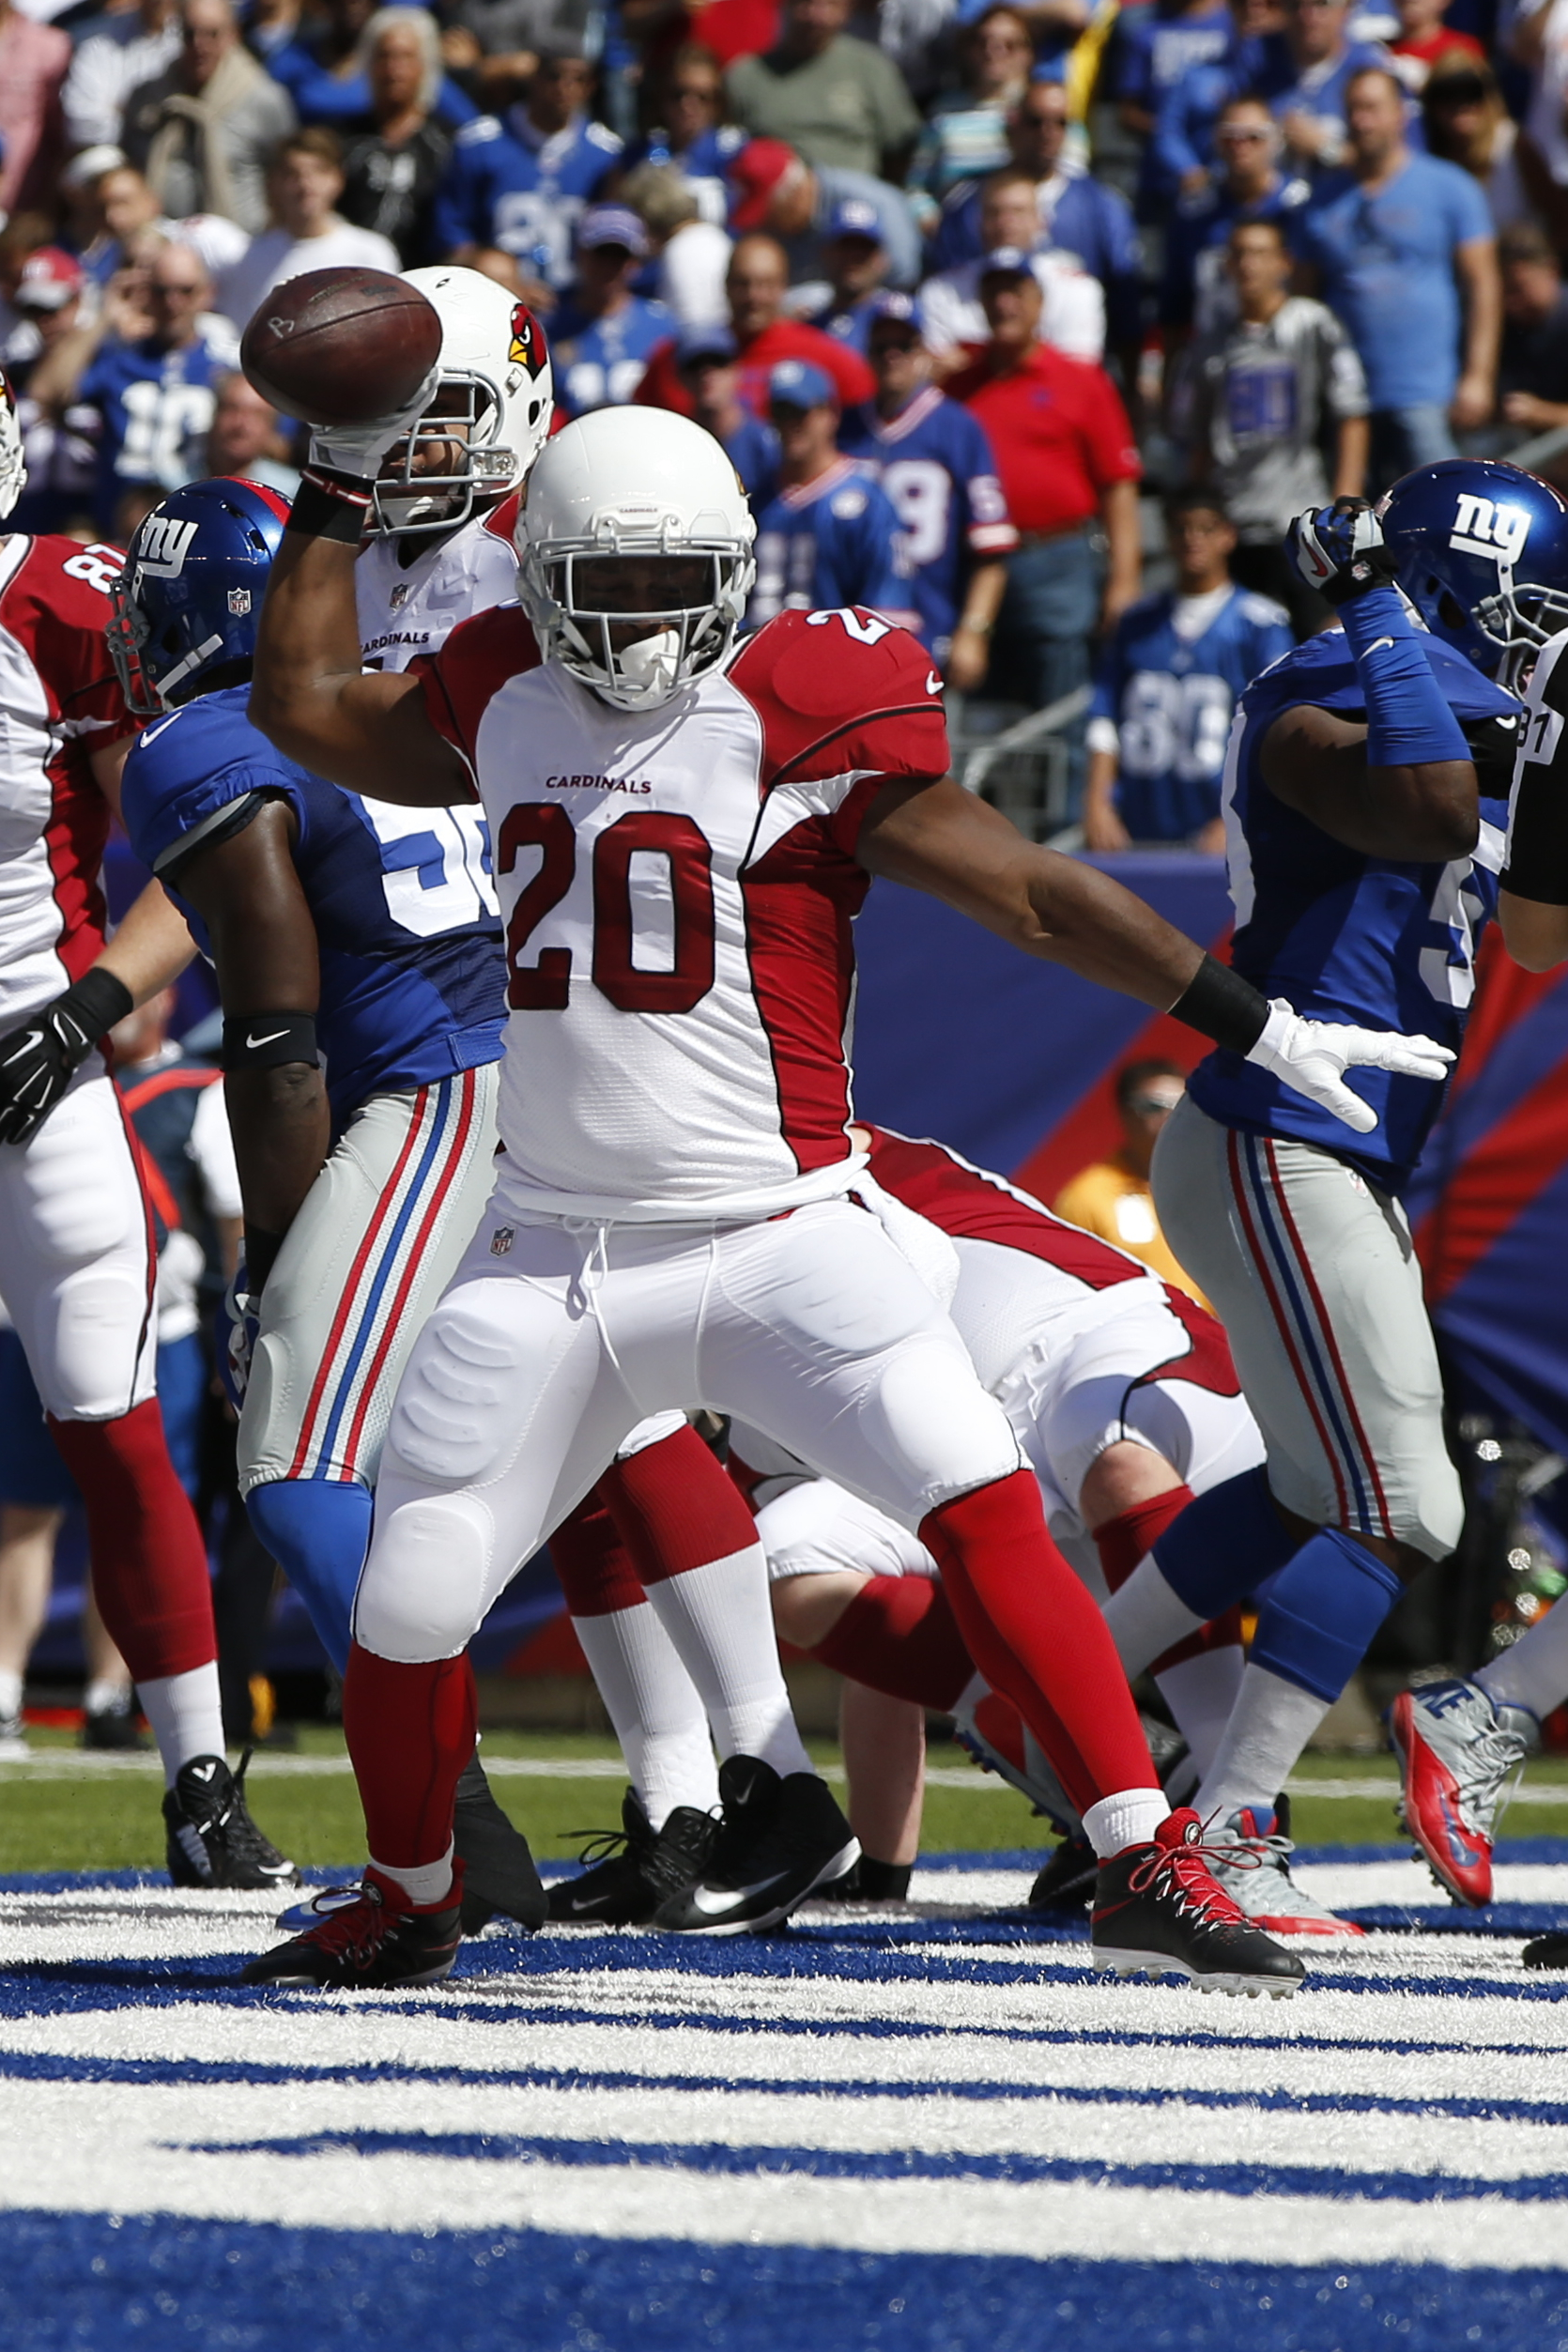 Arizona Cardinals running back Jonathan Dwyer (20) celebrates after scoring a touchdown during the first half of an NFL football game against the New York Giants on Sunday, Sept. 14, 2014, in East Rutherford, N.J.